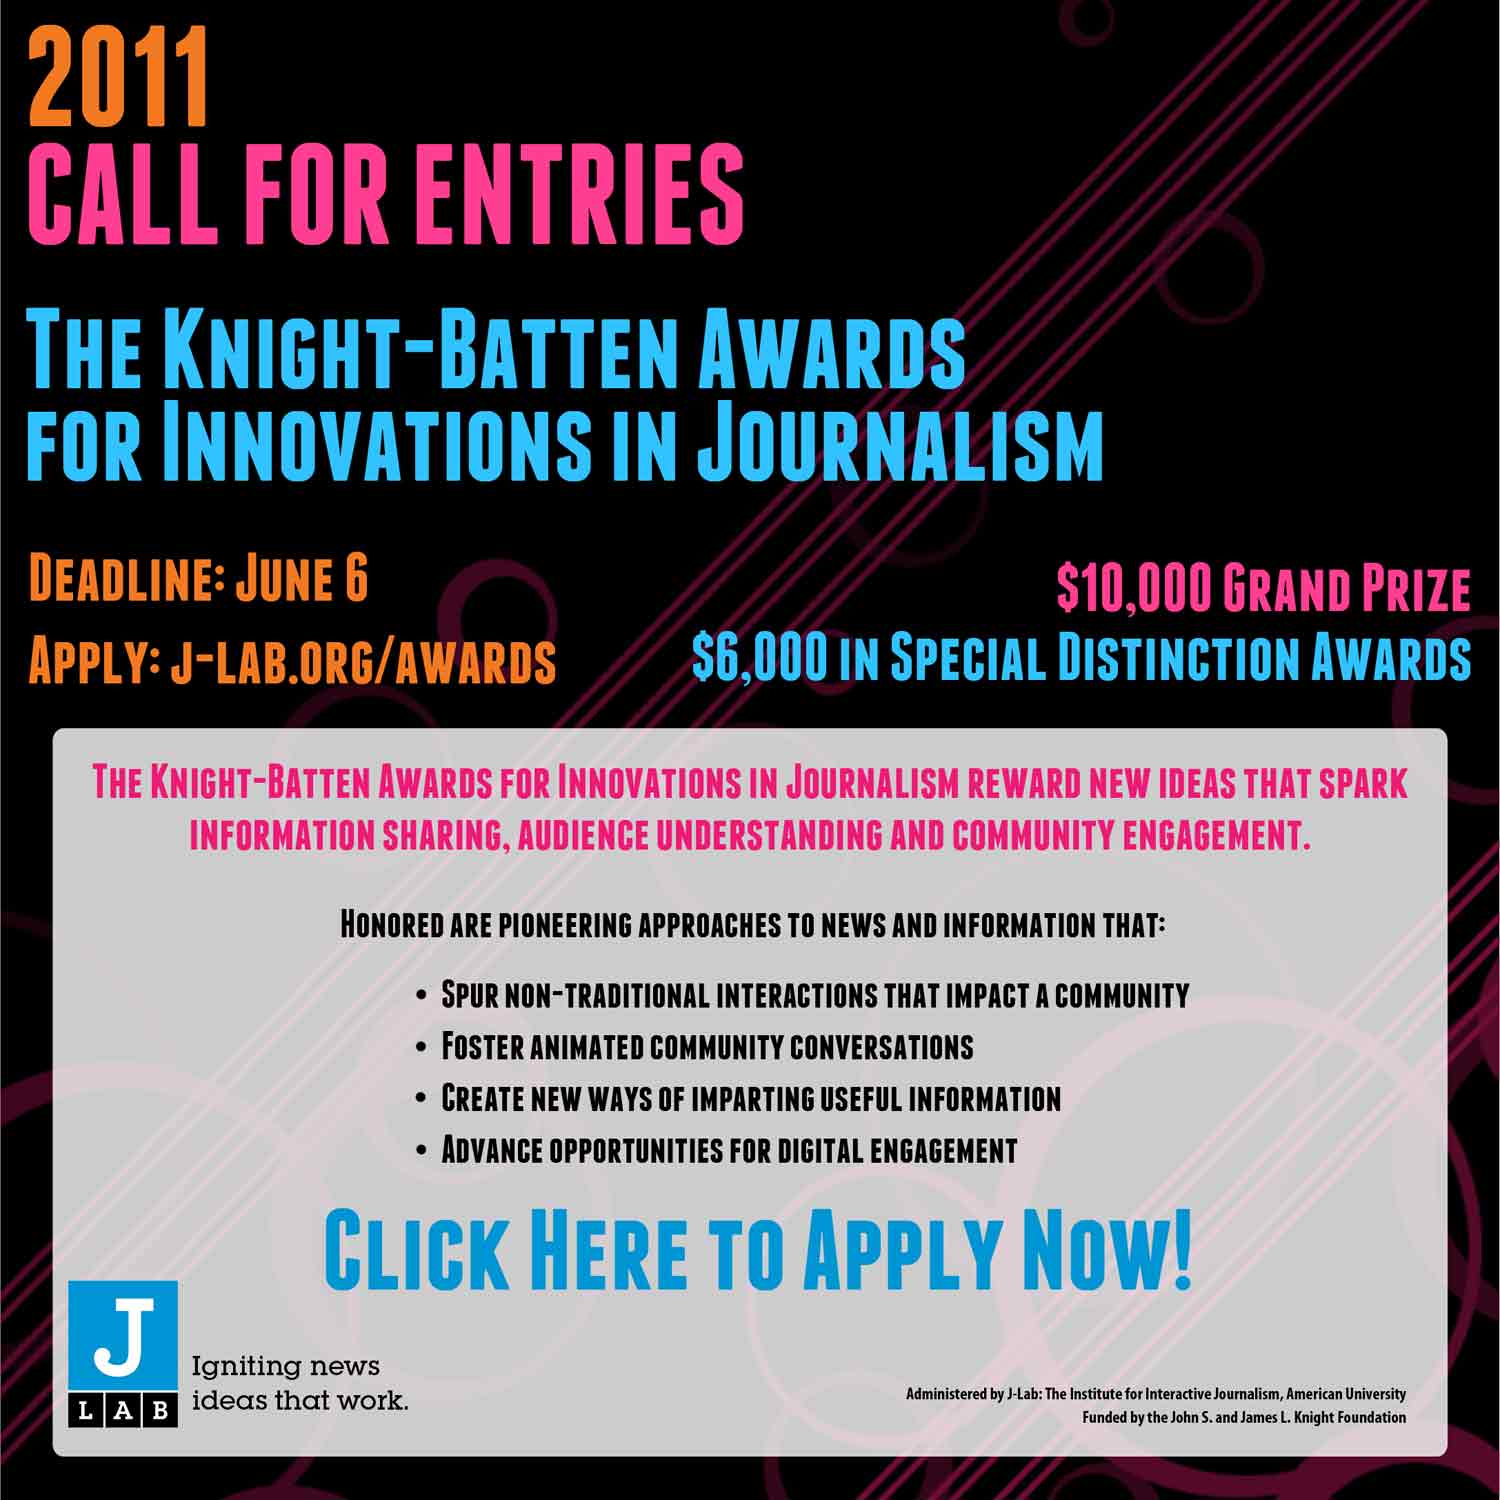 Apply now for the Knight-Batten Awards for Innovations in Journalism. $10,000 Grand Prize!